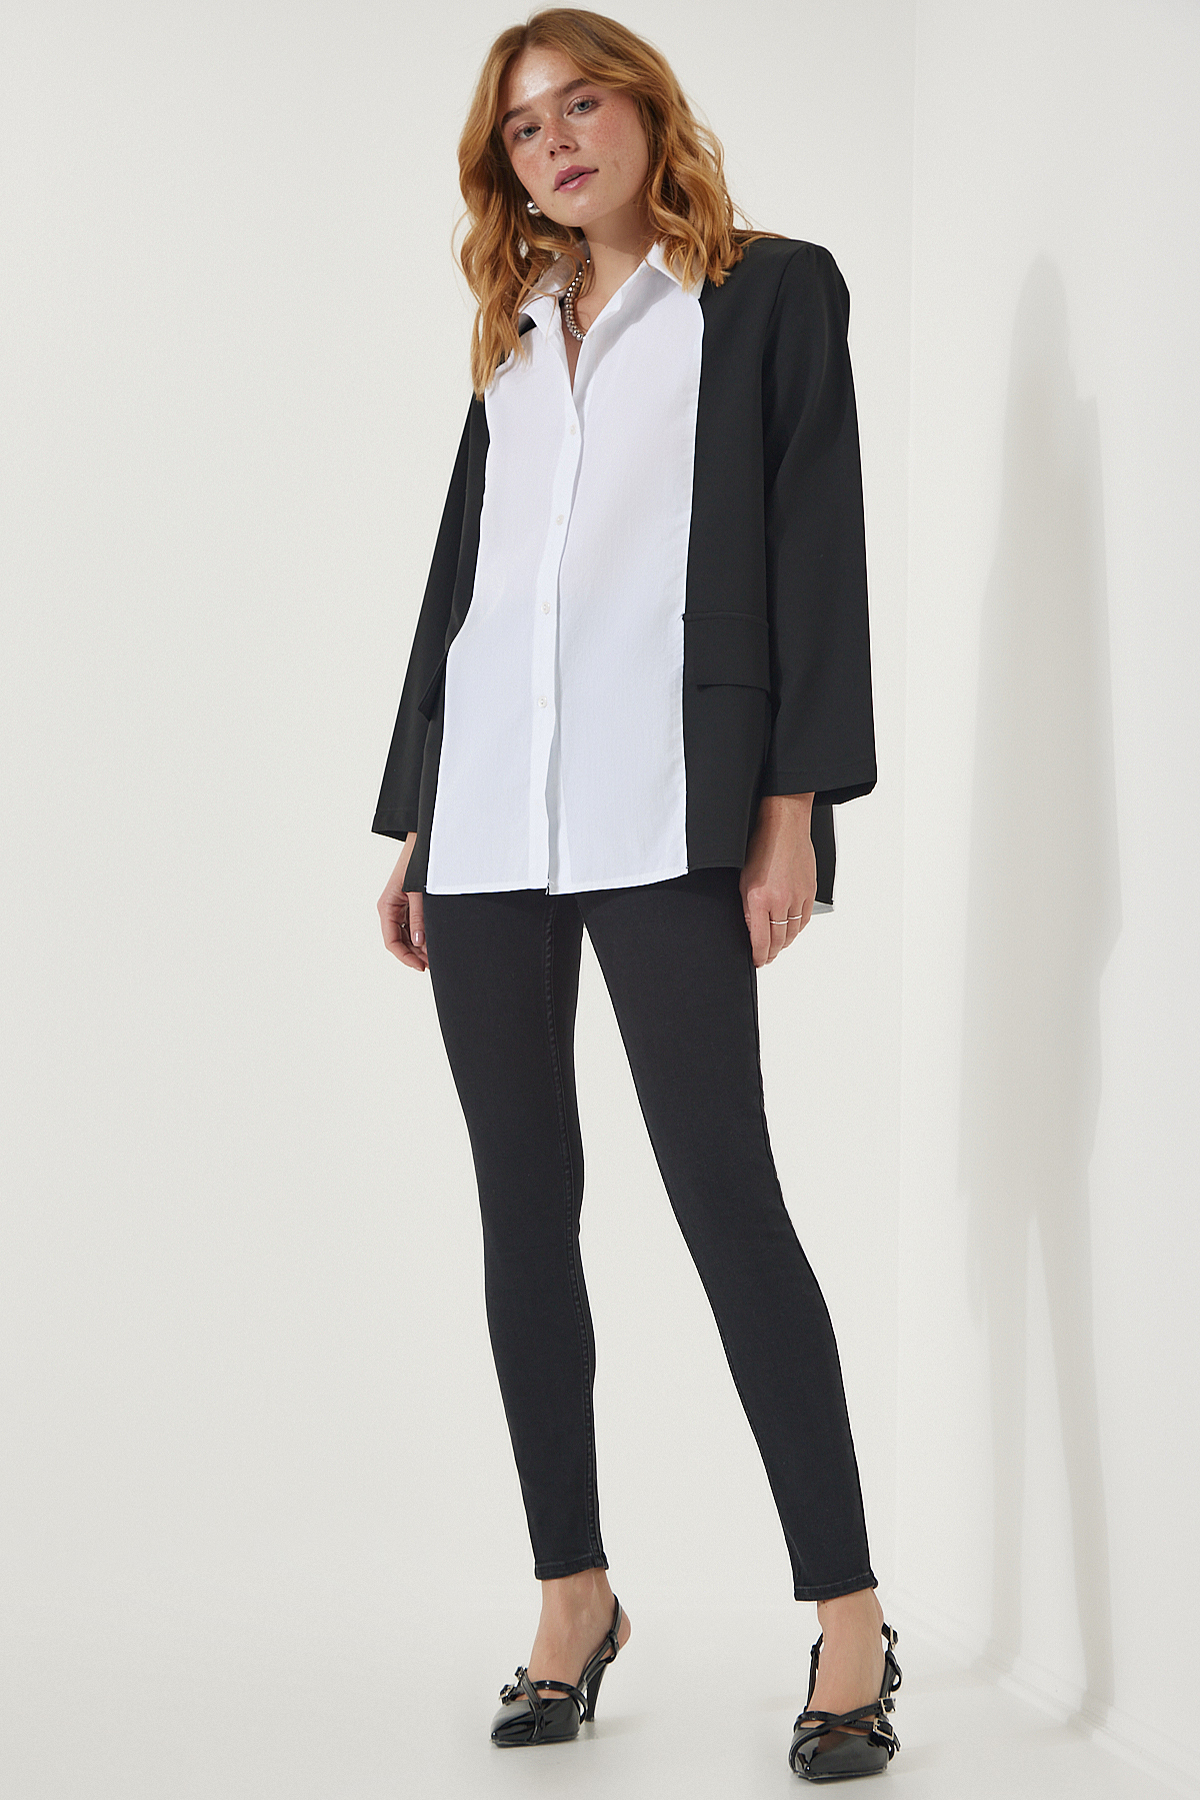 Happiness İstanbul Women's Black and White Jacket Look Oversize Design Shirt